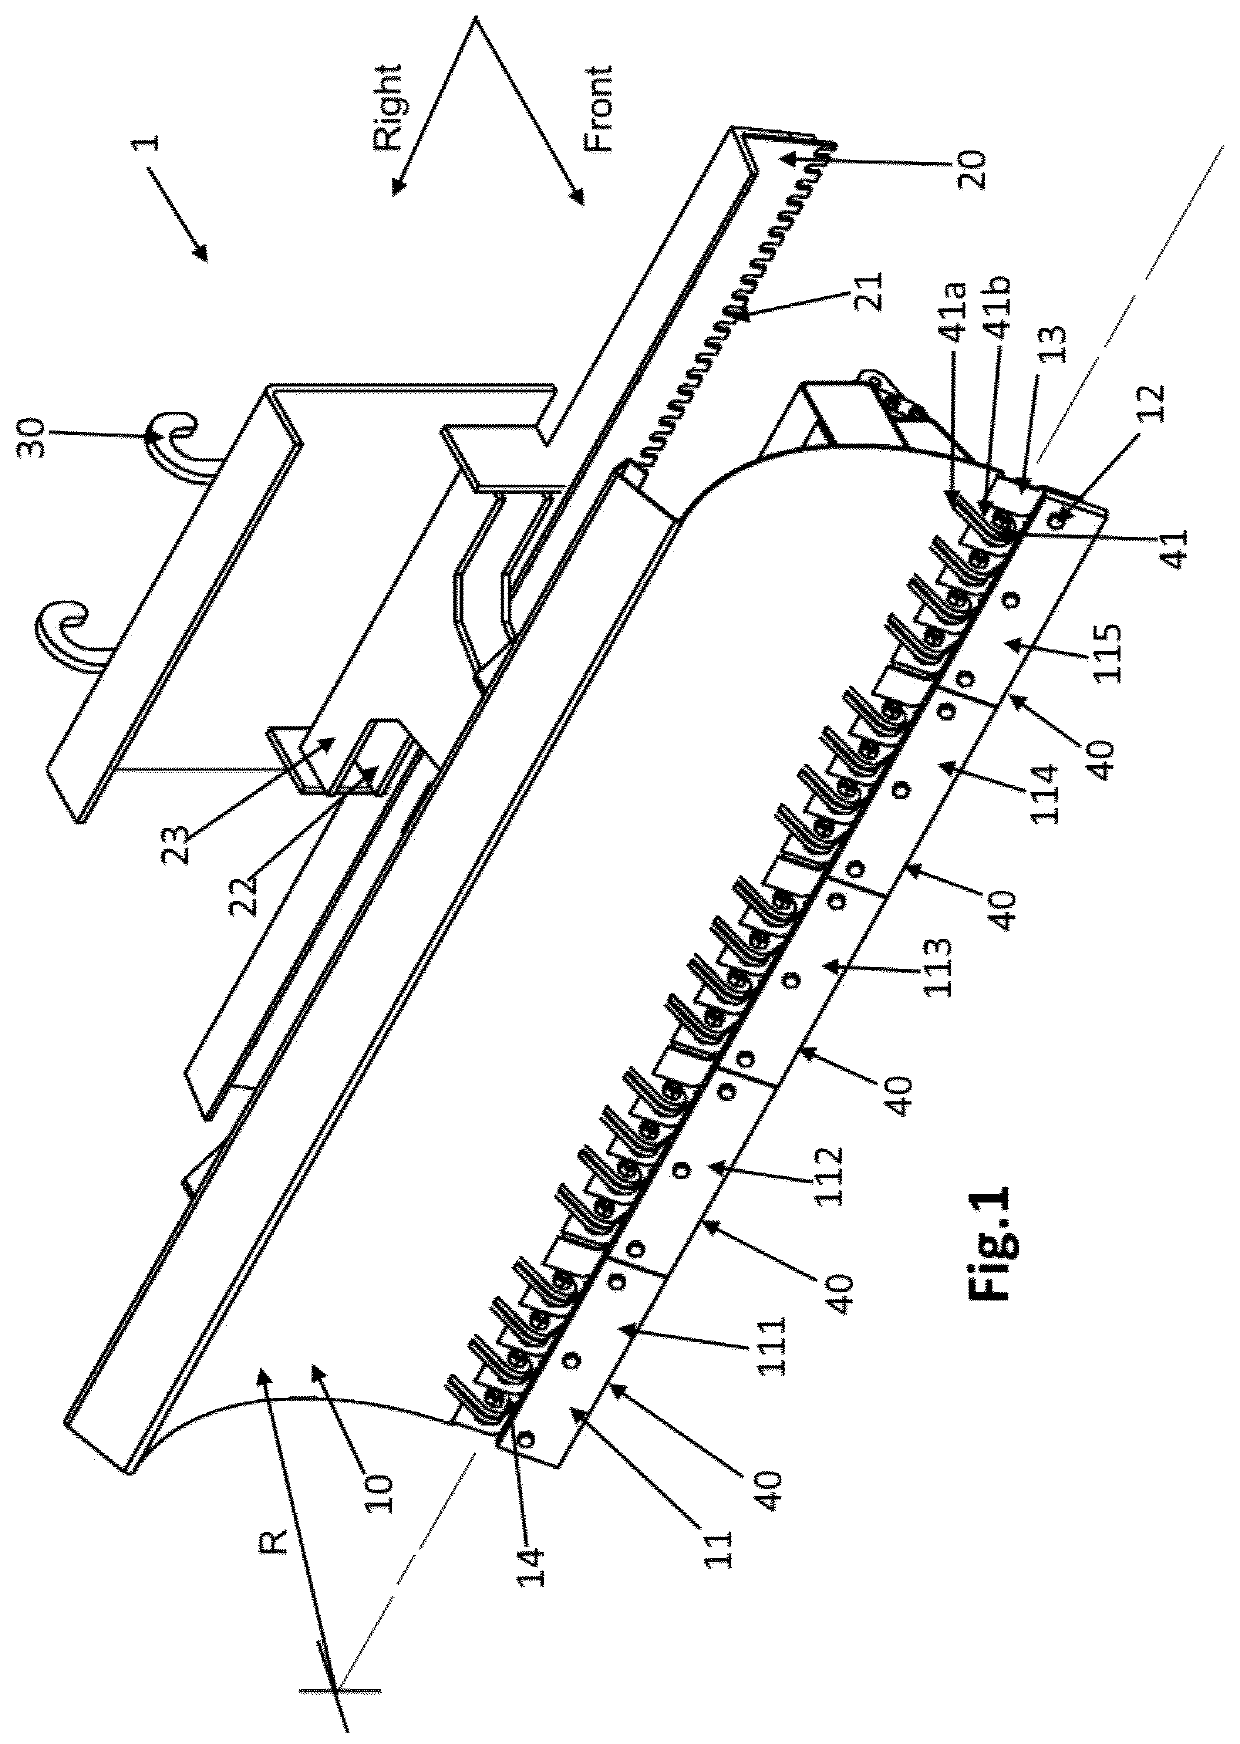 Snowplow with positive rake angle cutting blade and ice scraper